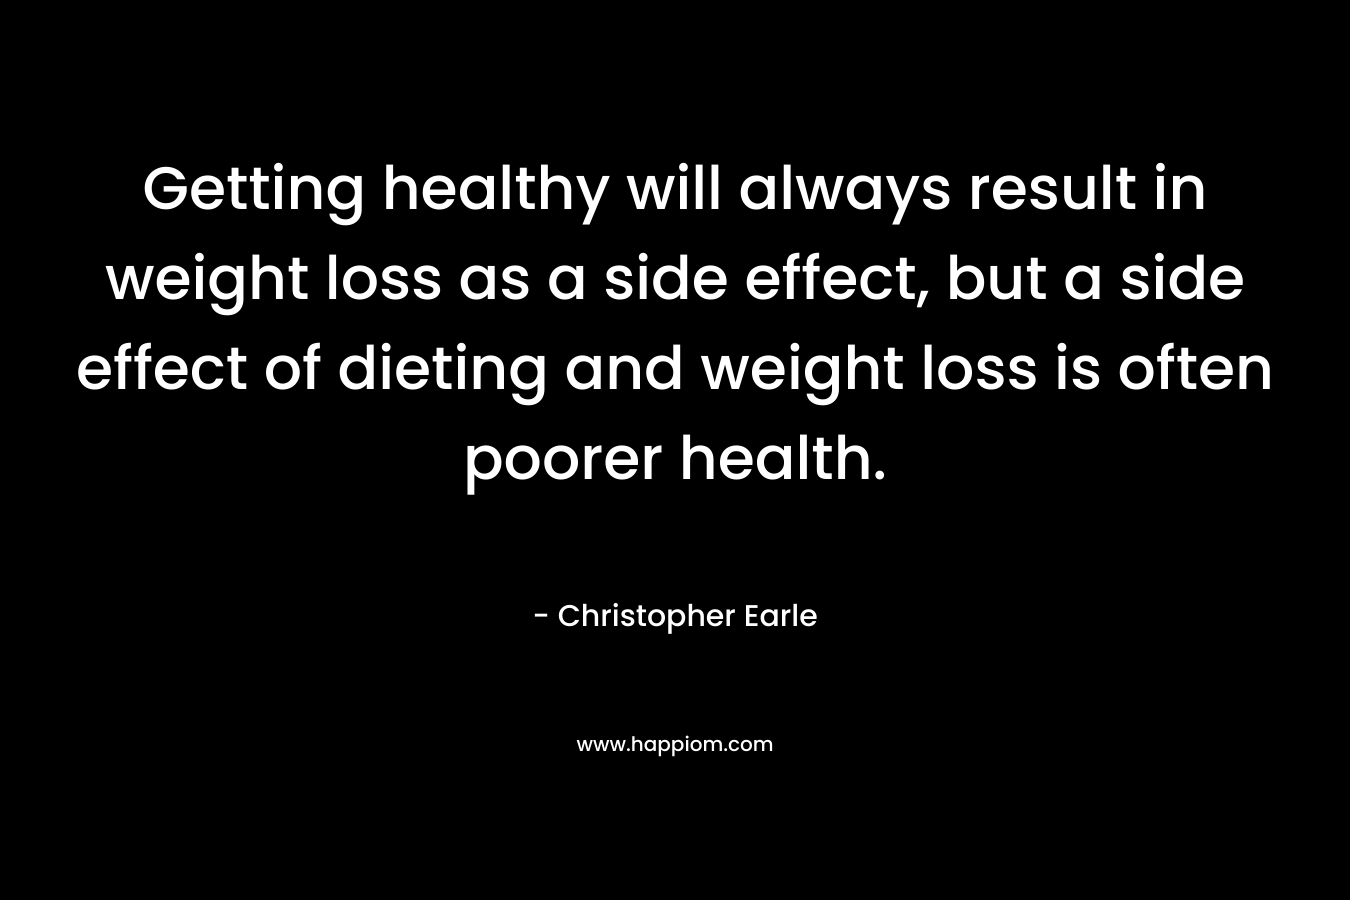 Getting healthy will always result in weight loss as a side effect, but a side effect of dieting and weight loss is often poorer health. – Christopher Earle